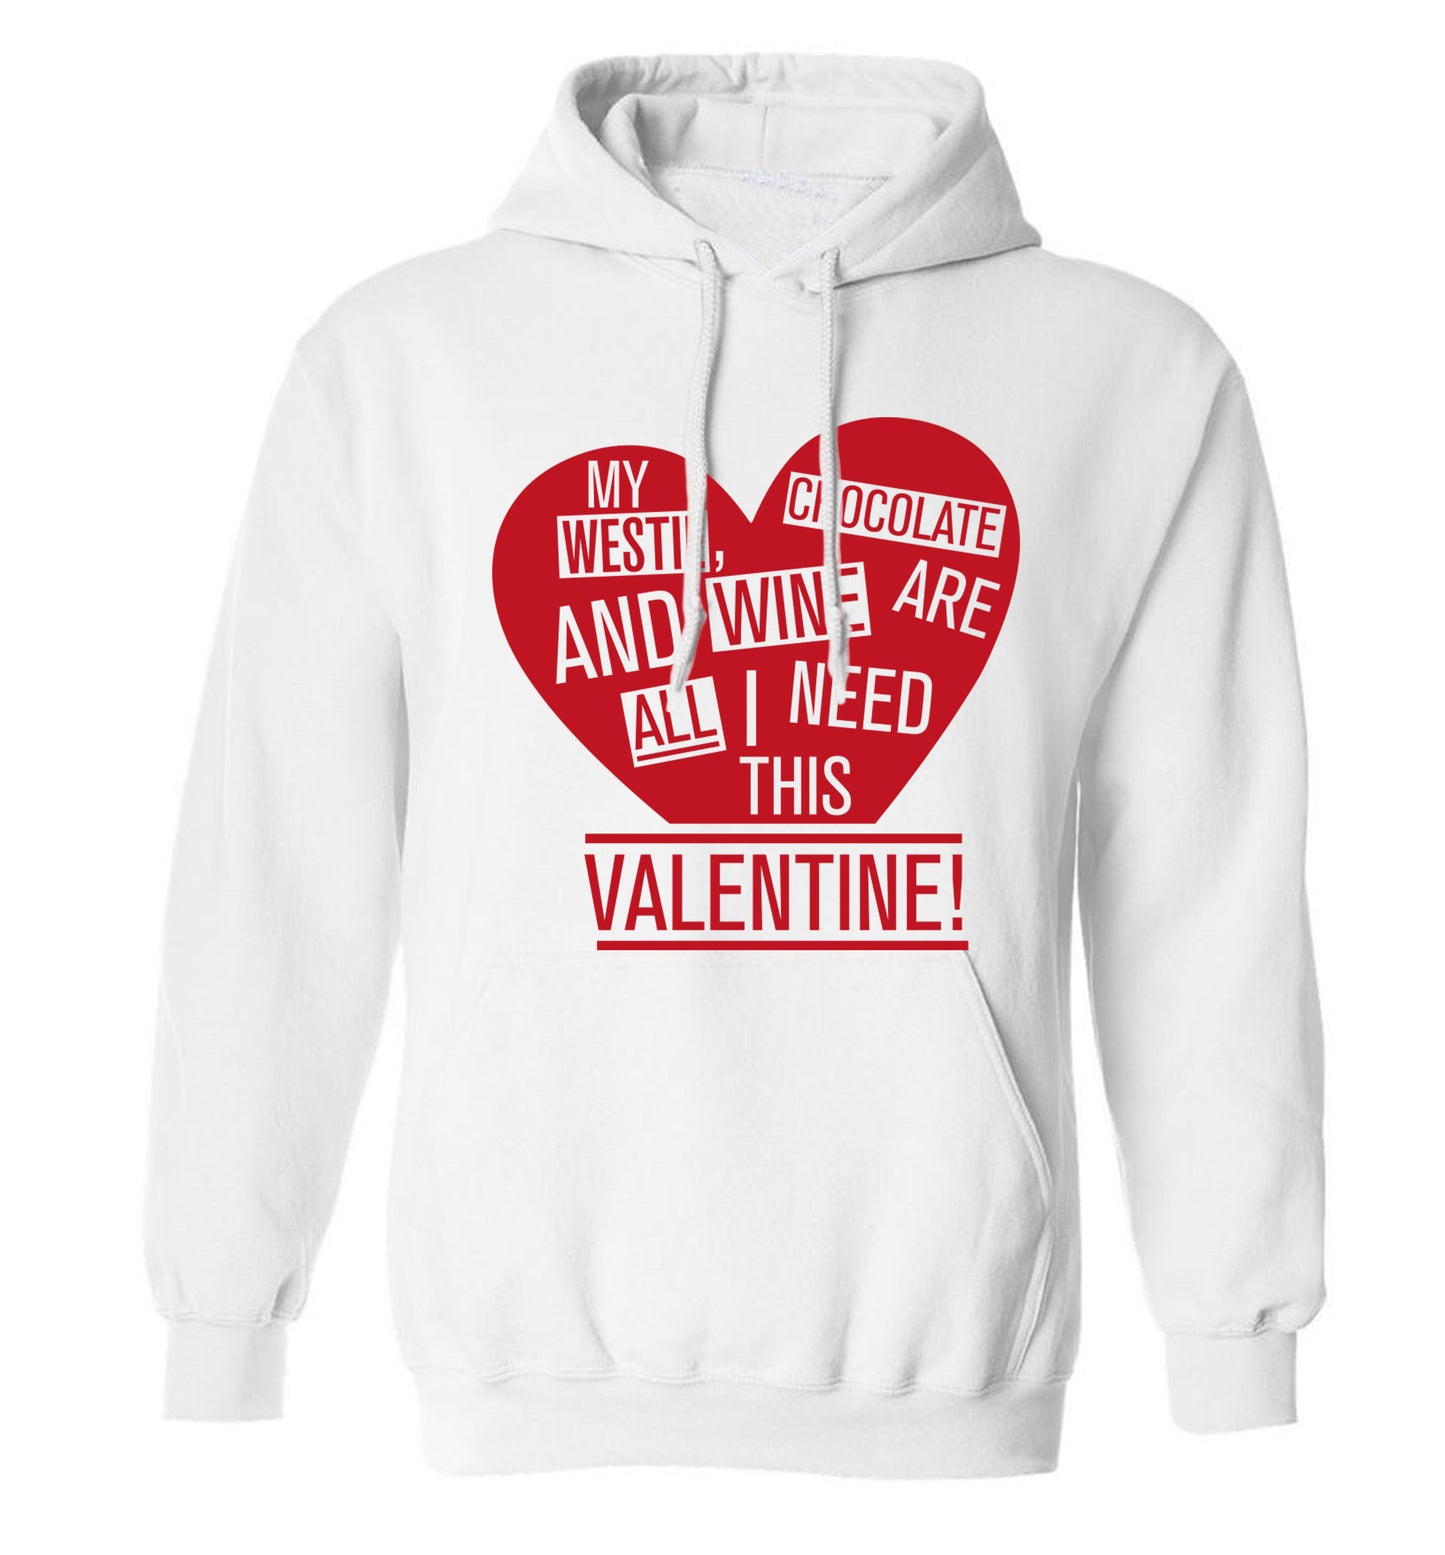 My westie, chocolate and wine are all I need this valentine! adults unisex white hoodie 2XL